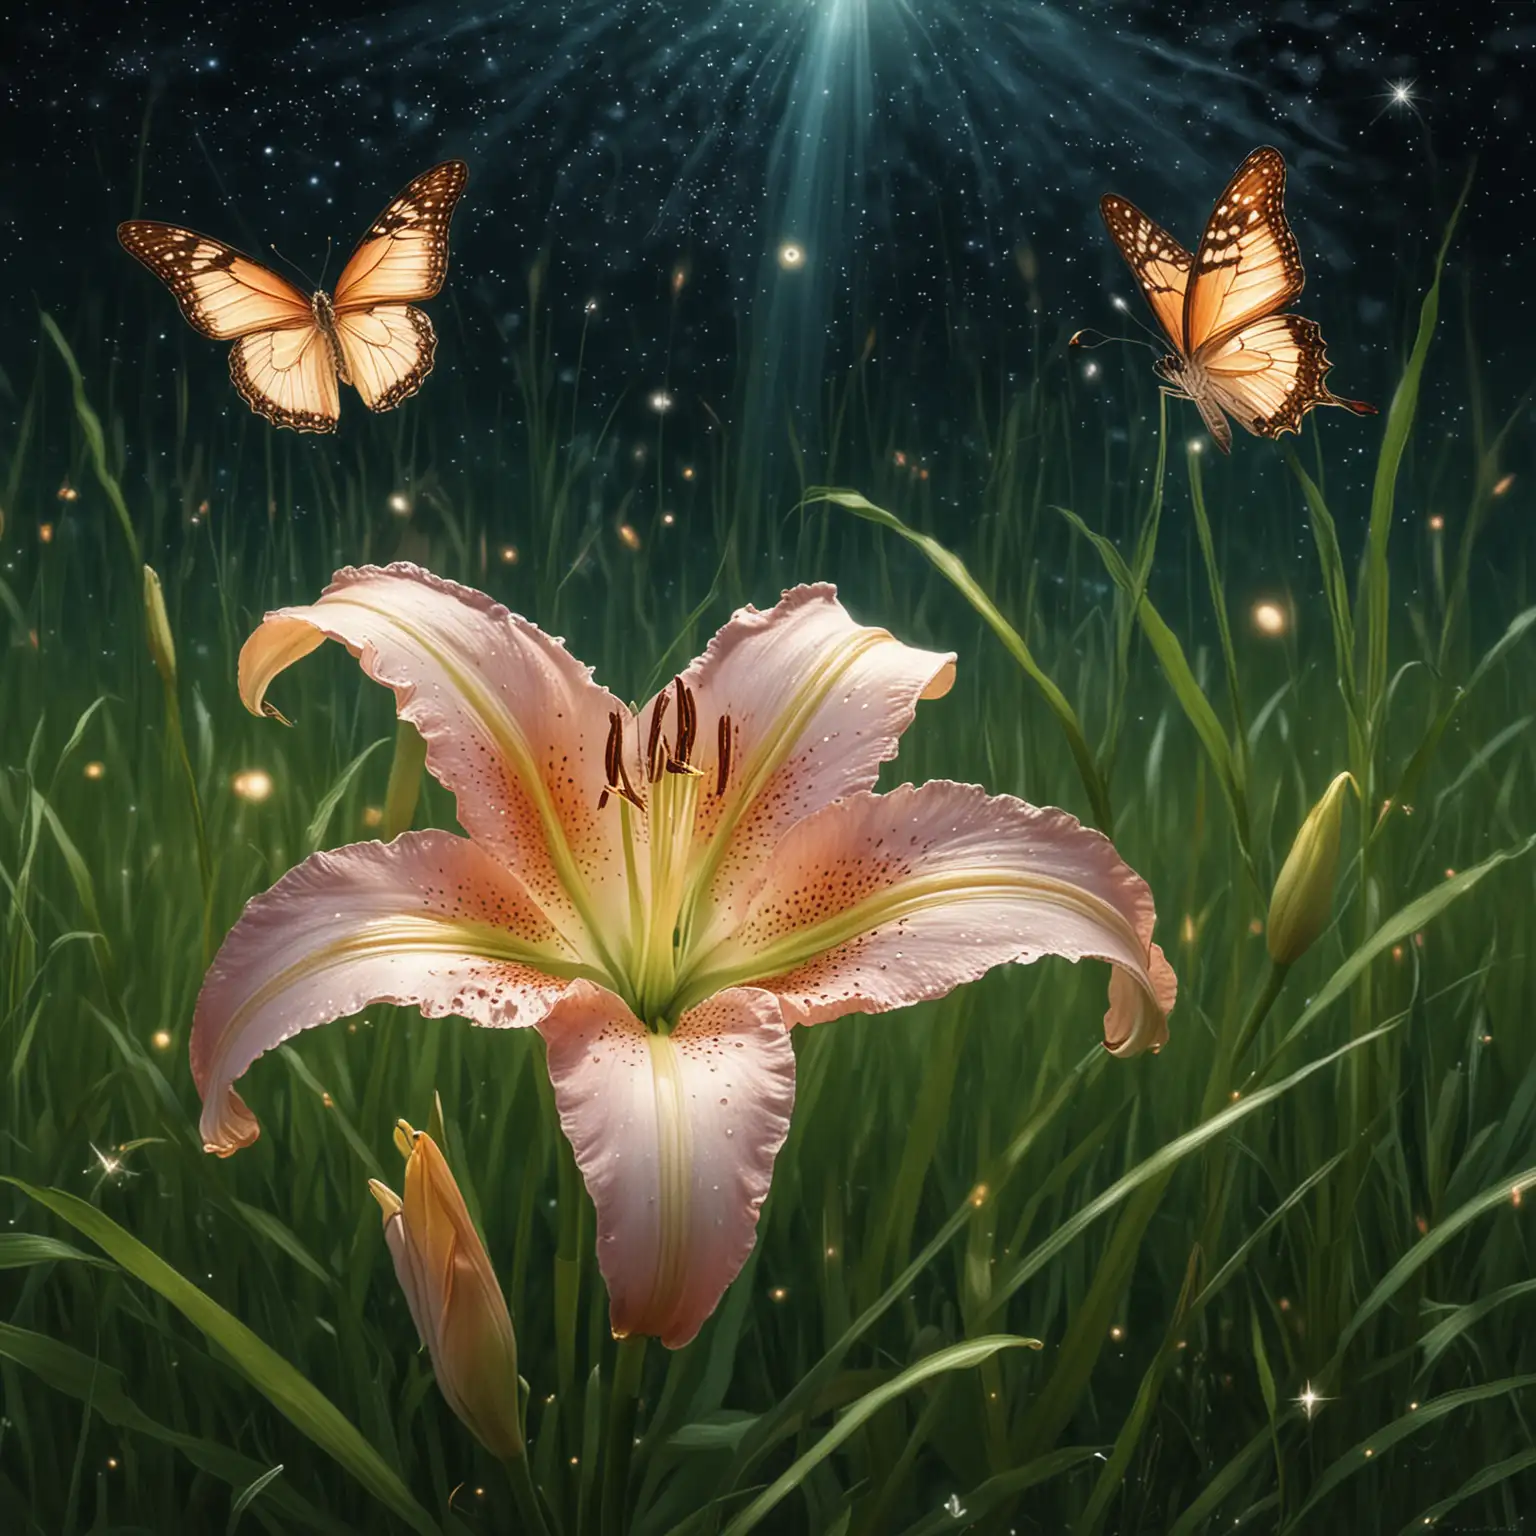 A digital art illustration of a warm, ethereal light emanating from a singl,\e stargazer lily blooming in a field of soft green grass. two butterflies flutter around the light, some alighting on the lily's petals. 
You can add a starry night sky as As before, consider including a very faint outline of two female silhouette within the light form.
 eye level perspective
--ar 2:3 --sref https://s.mj.run/87Sjf94hFiI ::1.5 <https://s.mj.run/BdQFQve9VPQ>